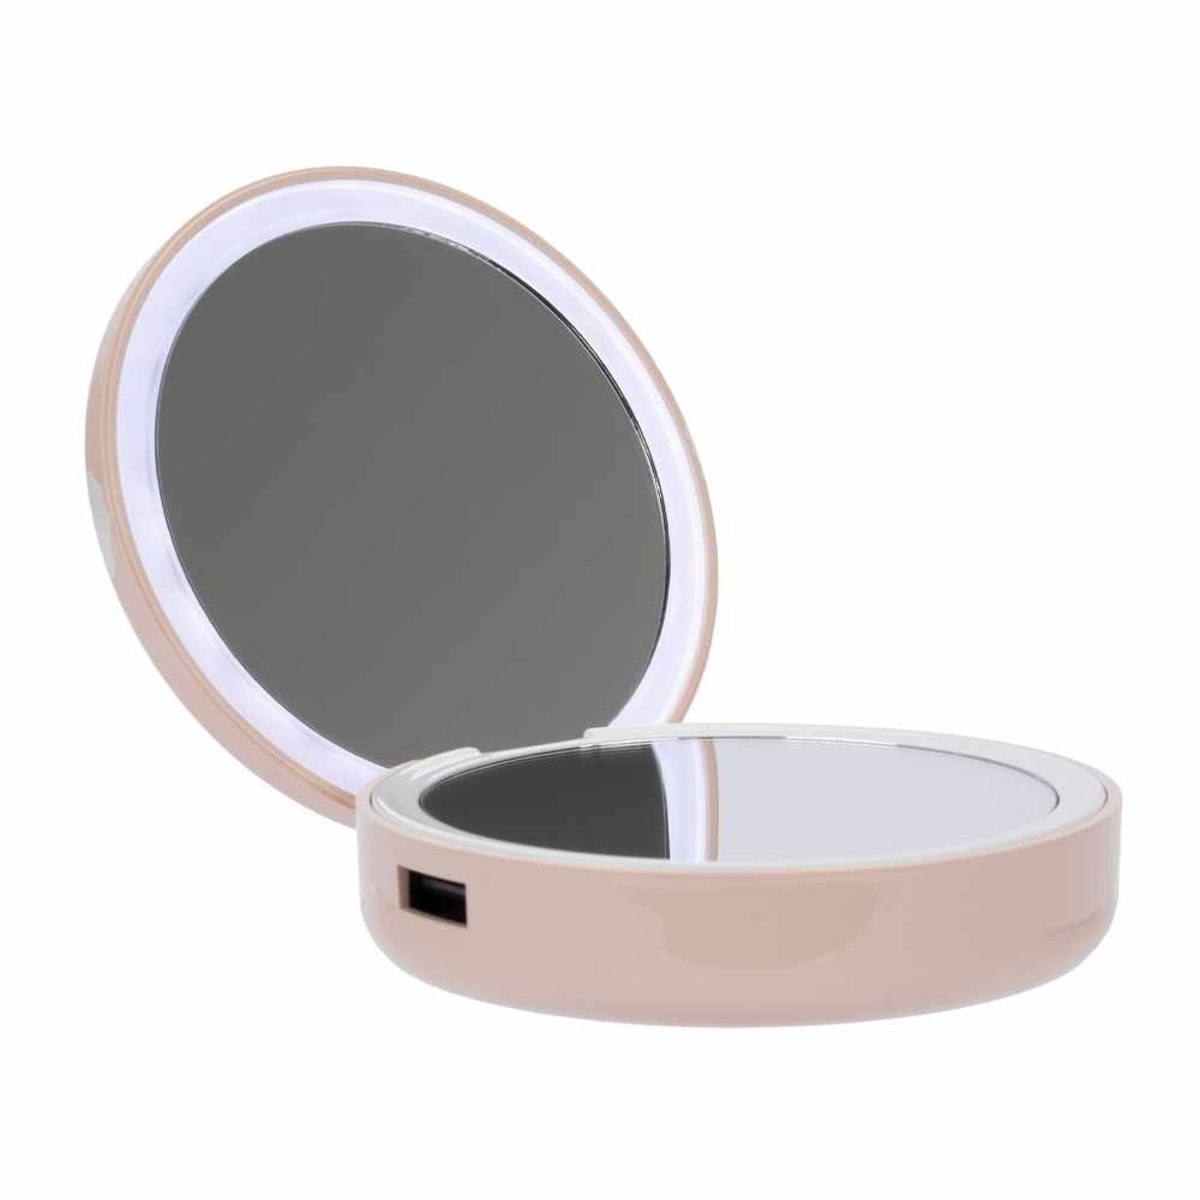 Kate spade compact mirror/ phone charger 